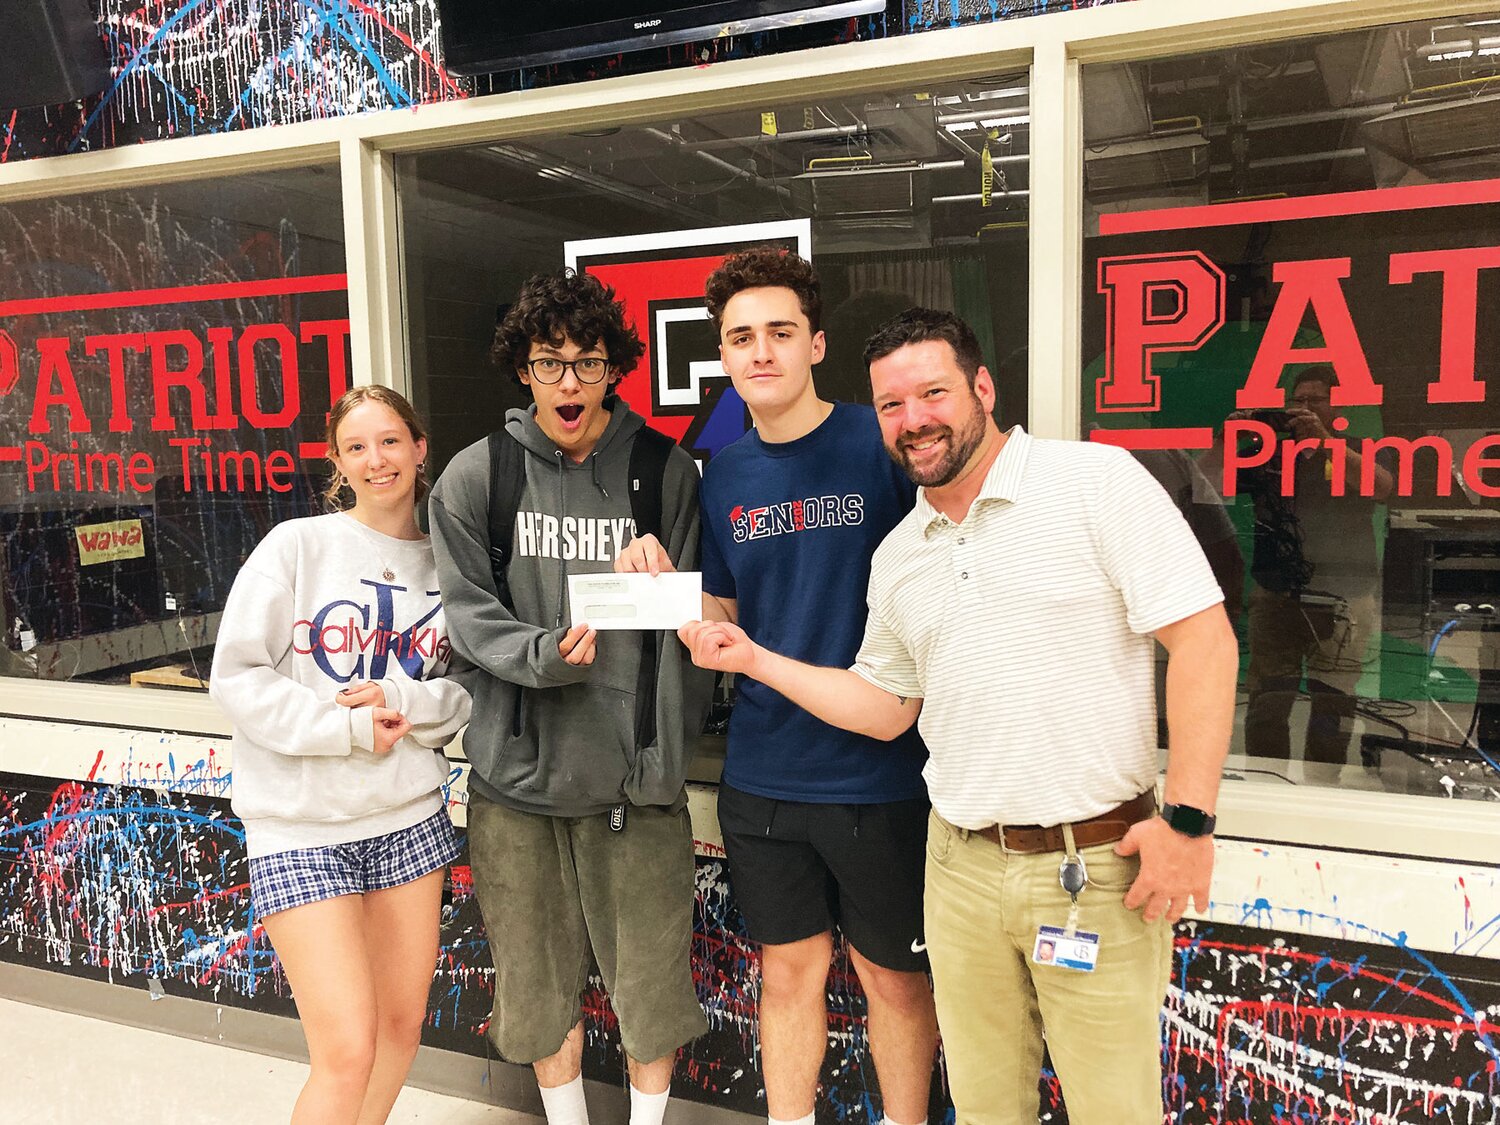 On behalf of the technology education department, students from Central Bucks High School East accept a $500 cash grant for winning this year’s Teen Driver Safety Video PSA Challenge powered by Comcast.